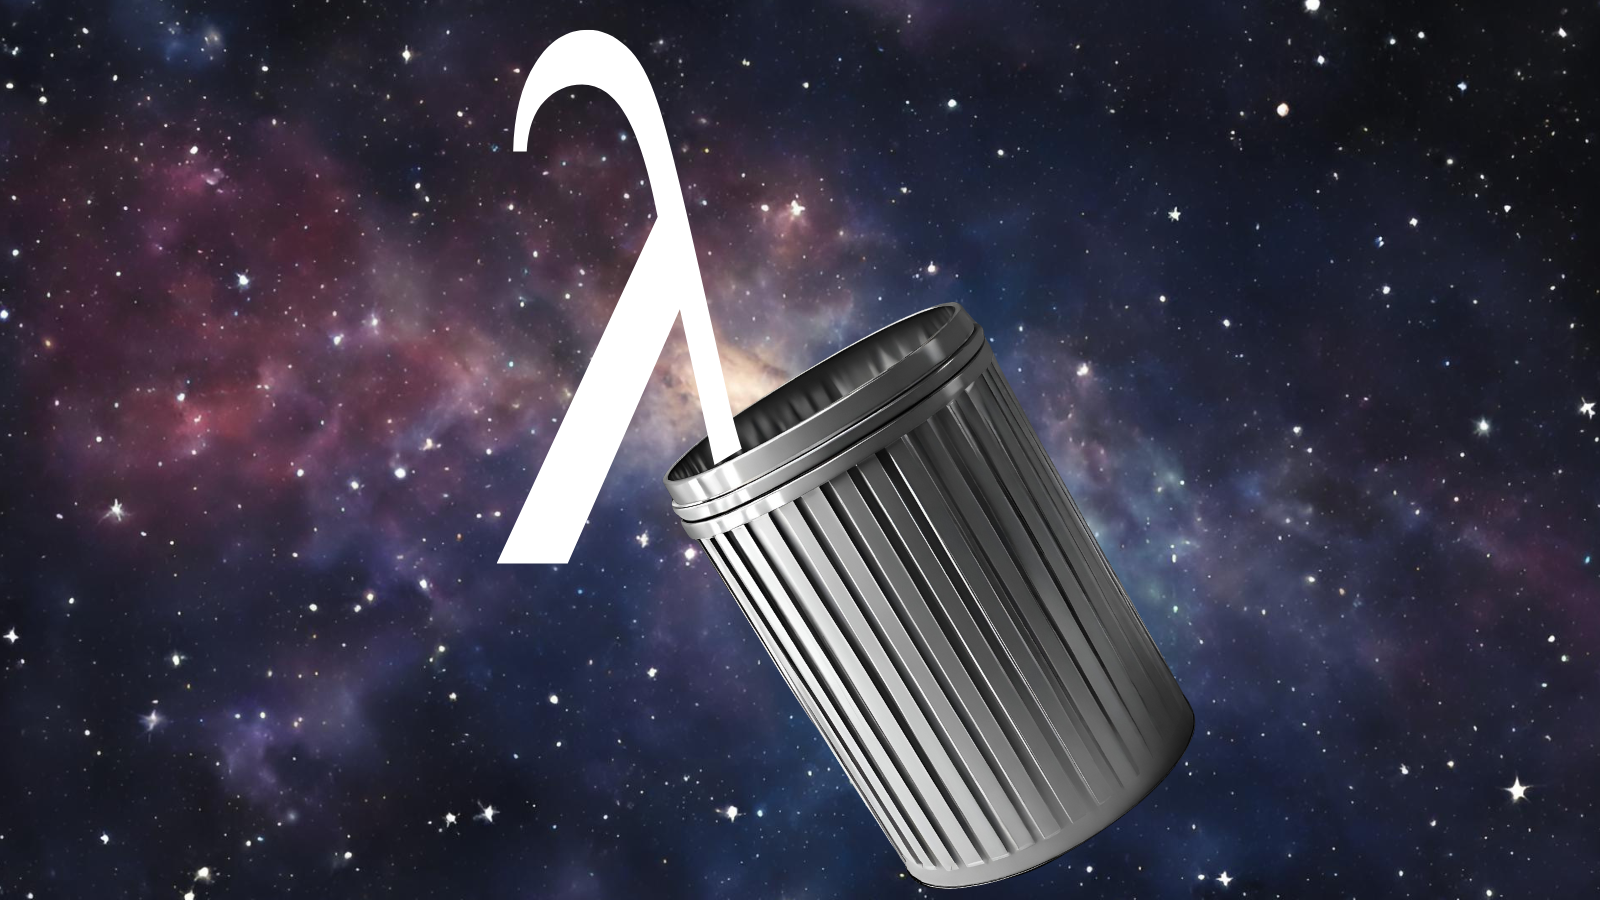 An illustration of a dustbin and a lambda falling into the bin. Both appear to be in space.